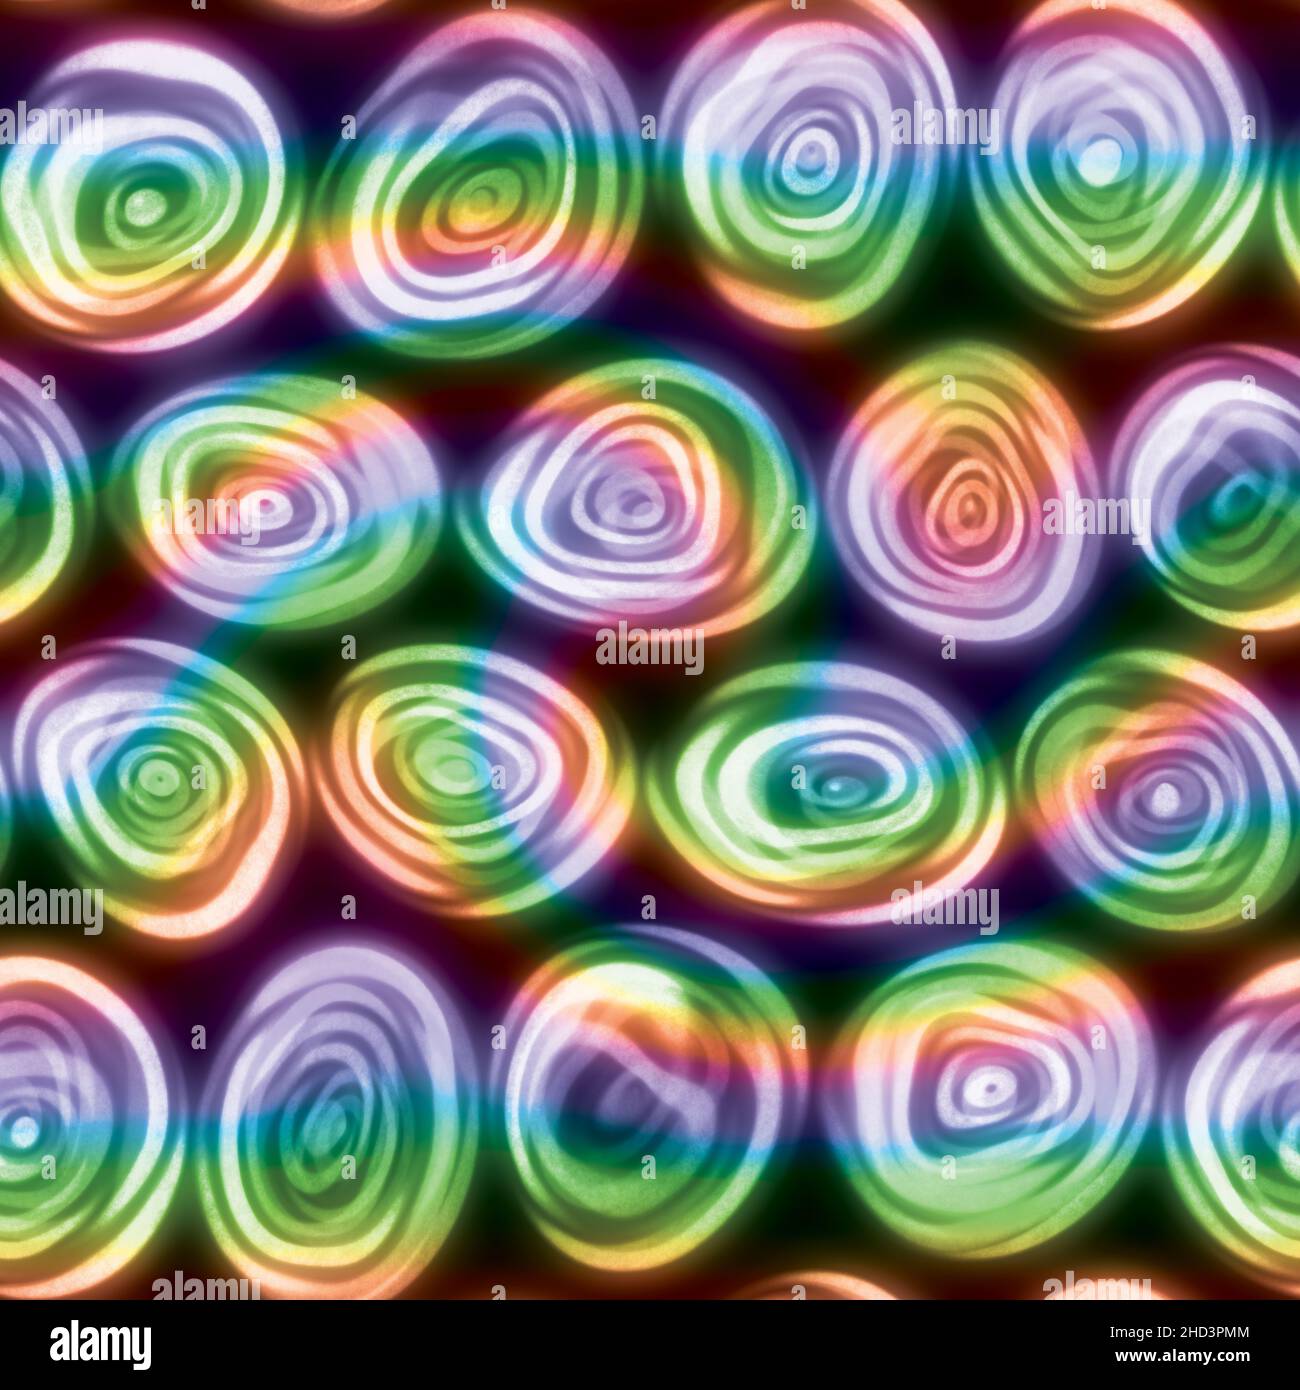 Large squiggly wiggly swirly whirly spiral circles that look hand drawn in a rainbow swirl seamless tile. Stock Photo